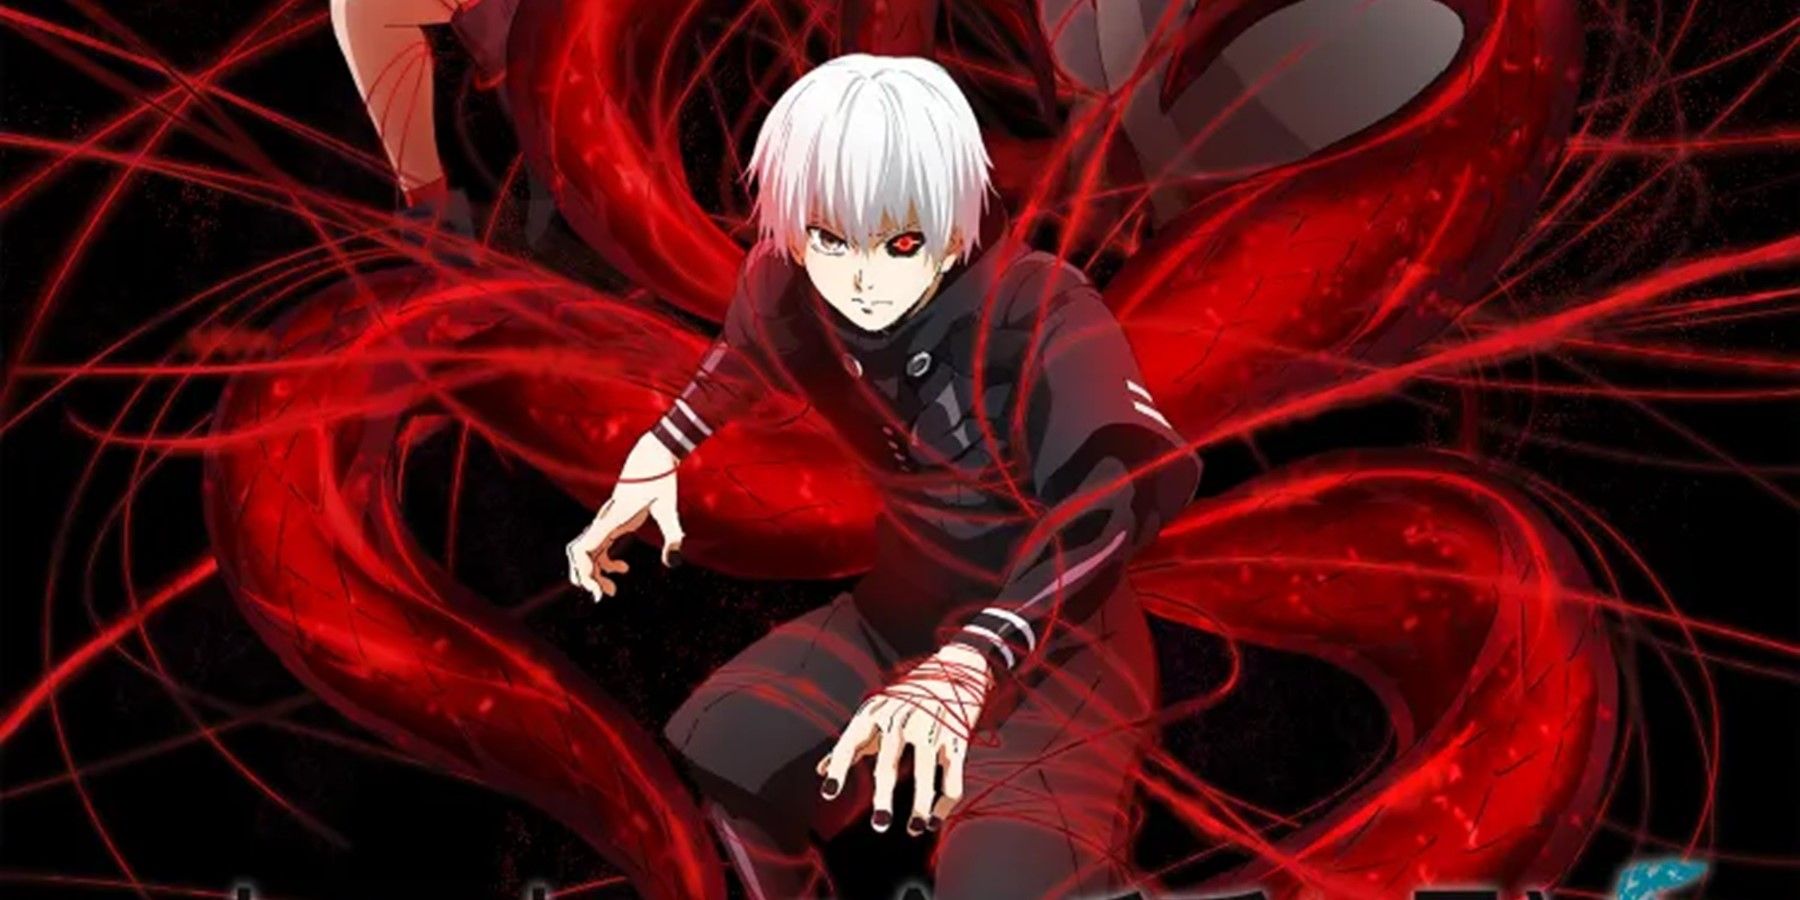 tokyo ghoul exposition visual cropped.jpg 